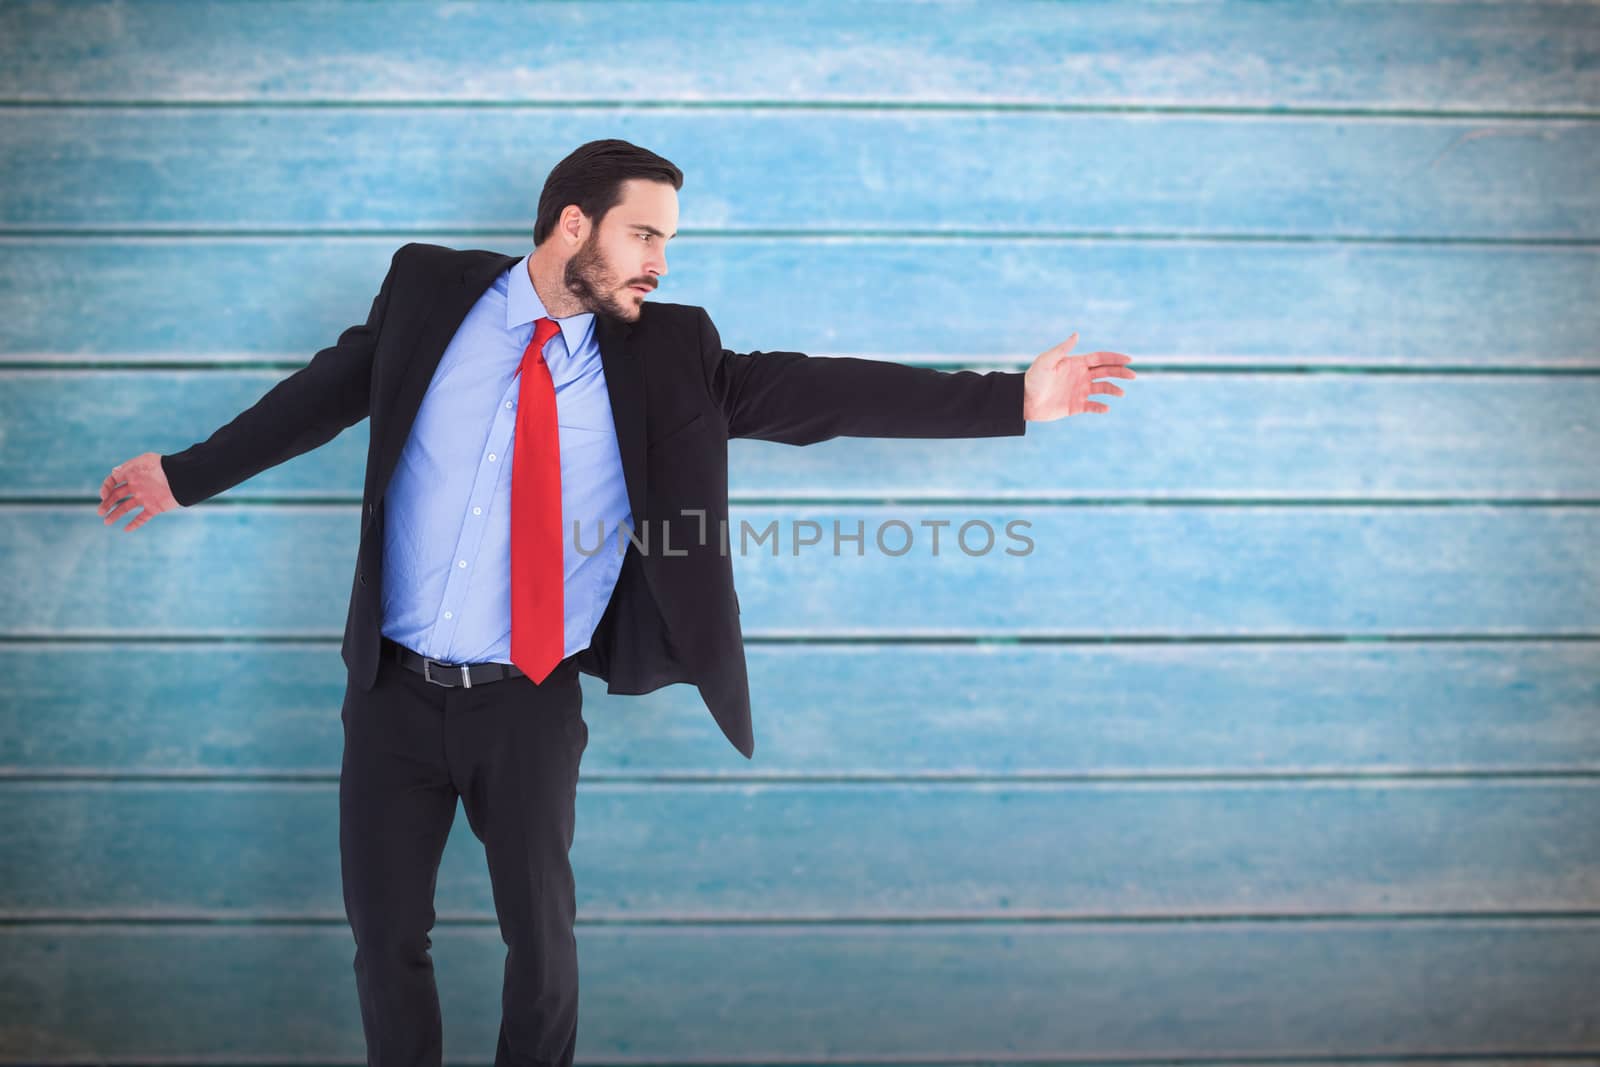 Serious businessman in suit gesturing with hand against wooden planks